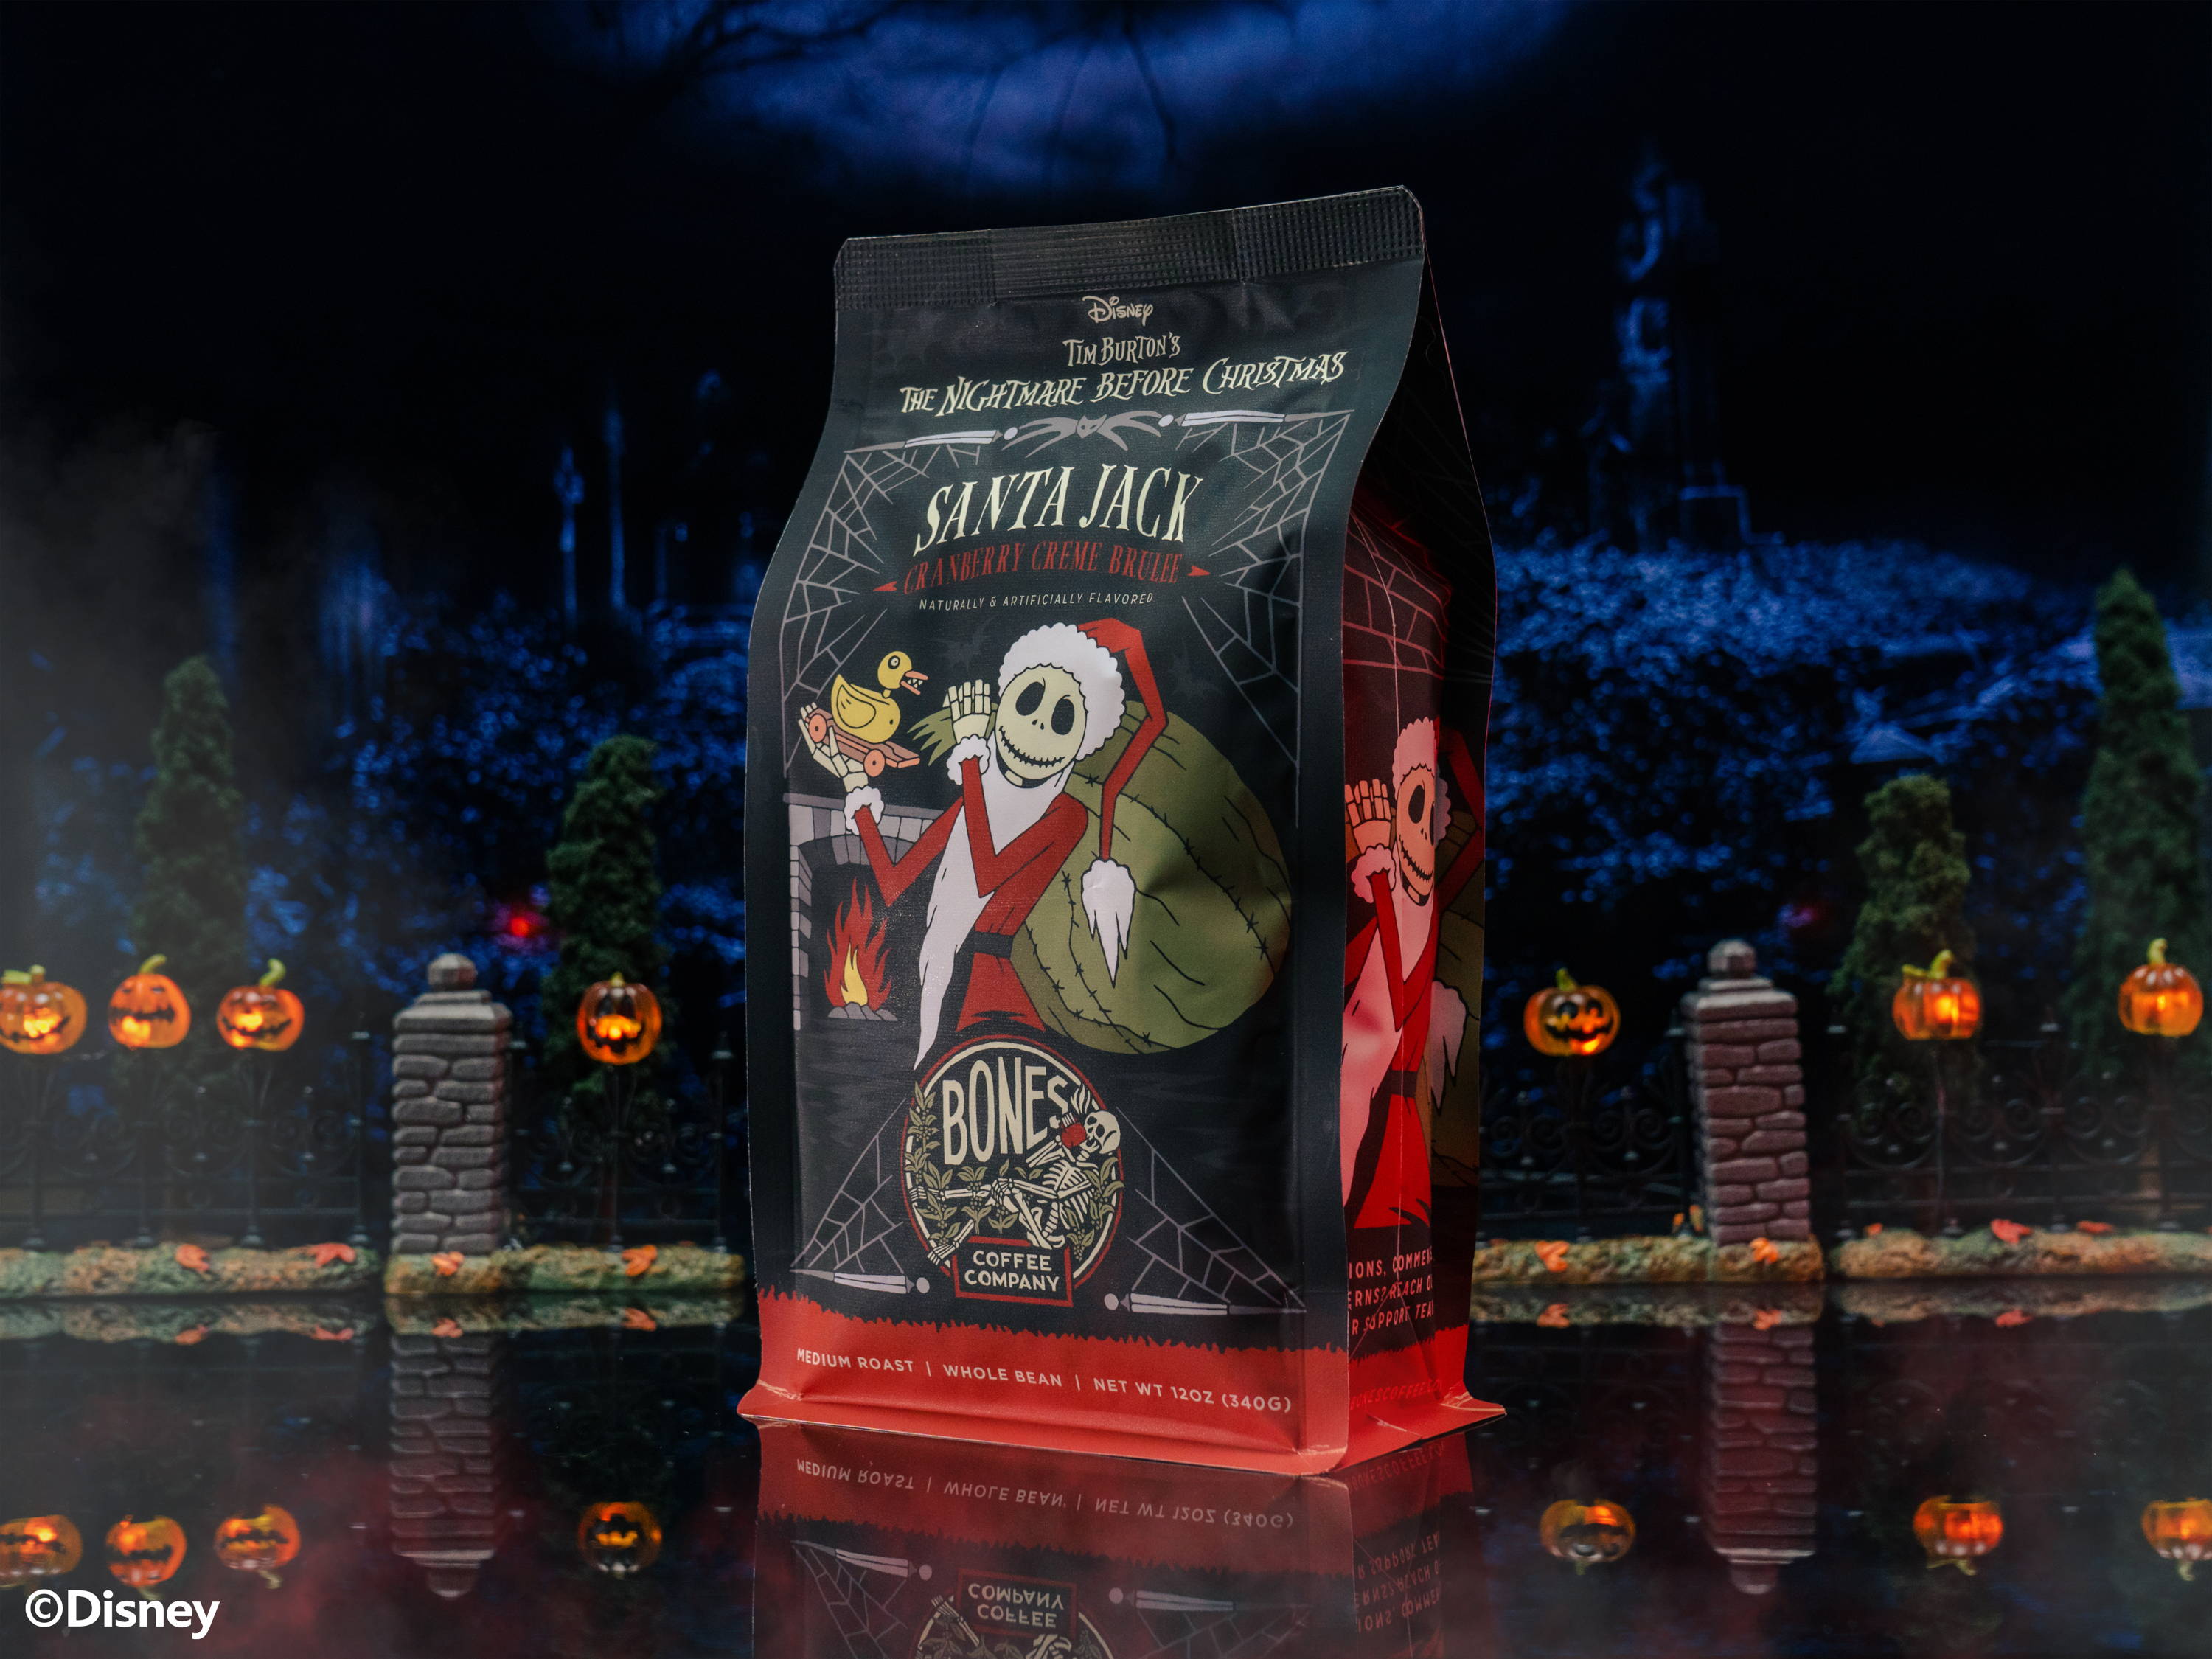 A 12 ounce bag of Bones Coffee Company Santa Jack coffee. Its flavor is cranberry creme brulee and it has Jack Skellington on the art. The bag is inside a toy graveyard.